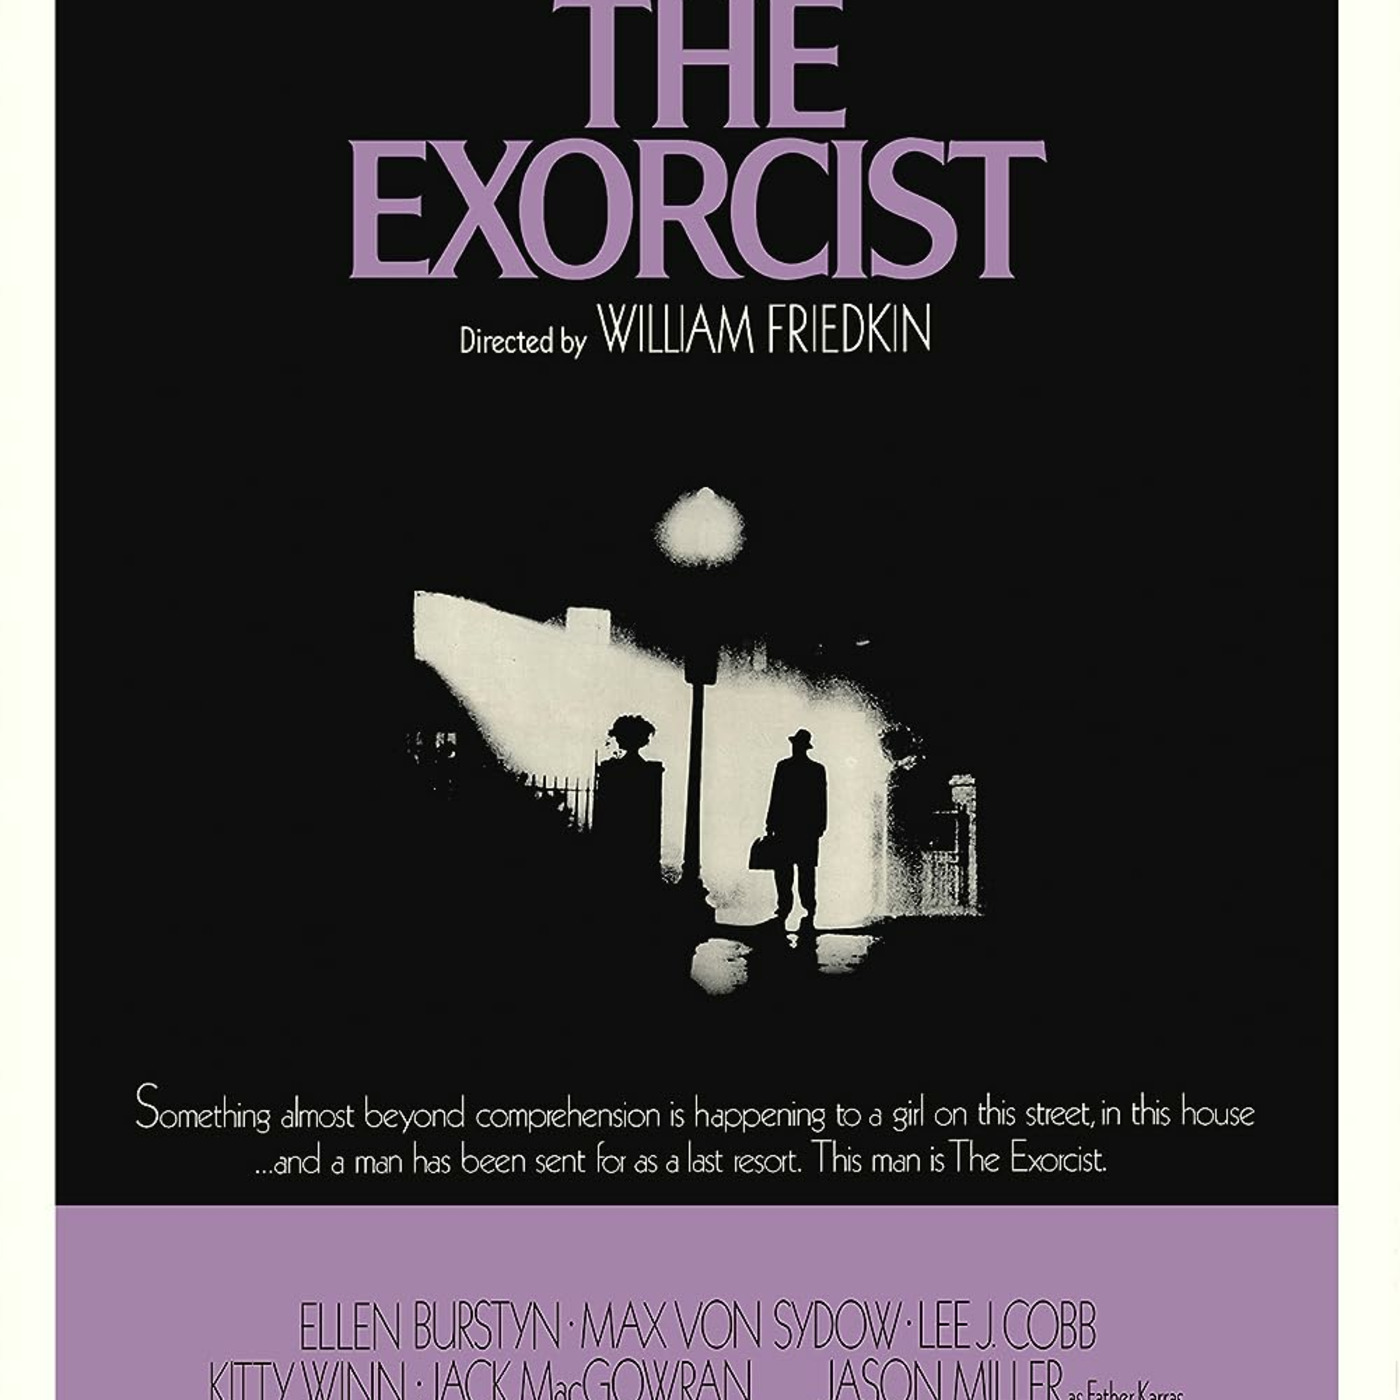 Episode 286: The Exorcist (2018 episode Re-release)